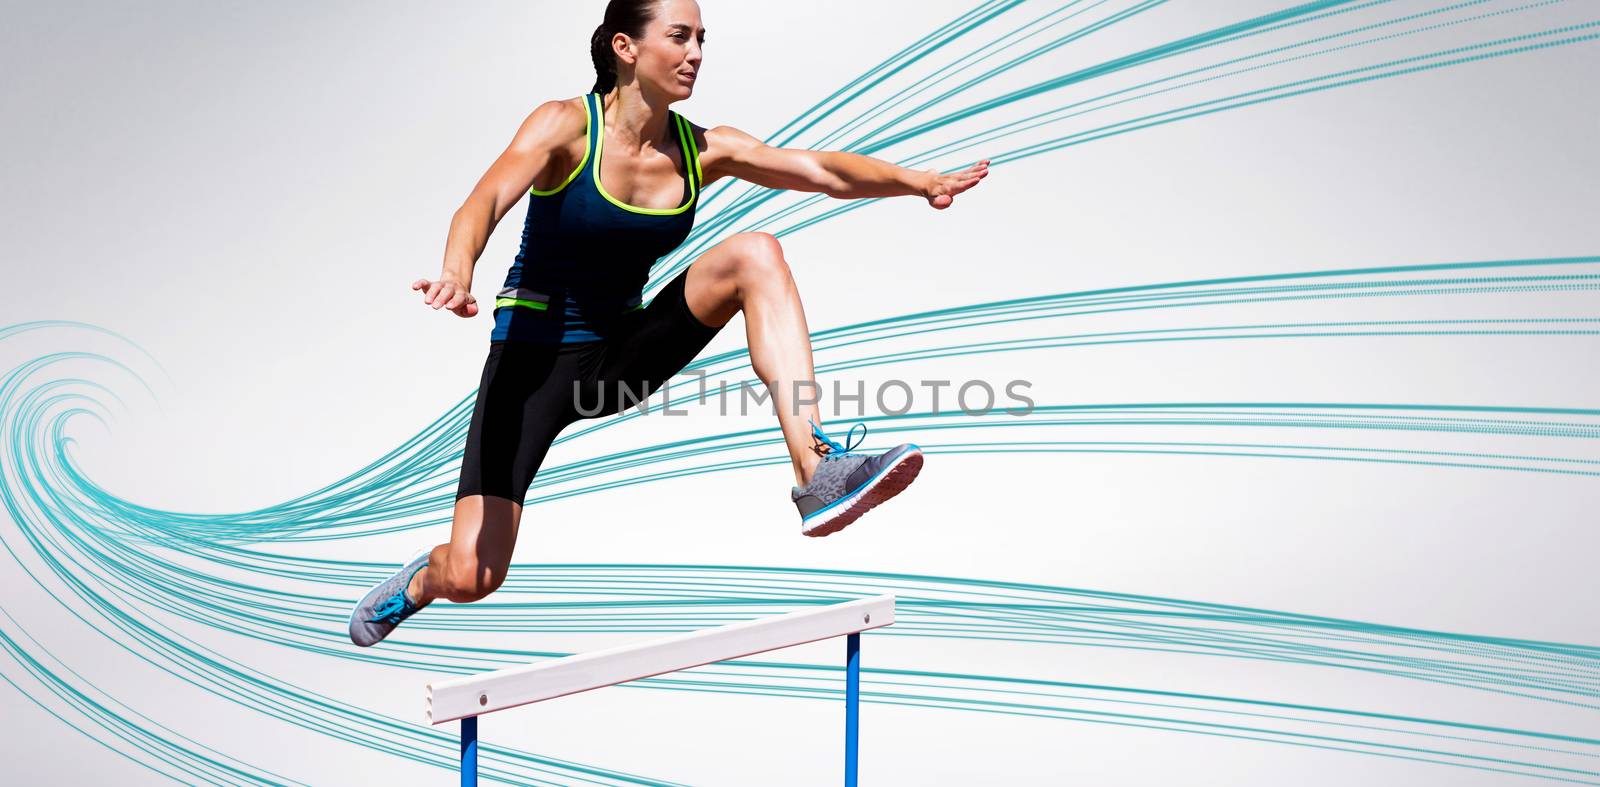 Athletic woman doing show jumping against blue abstract design